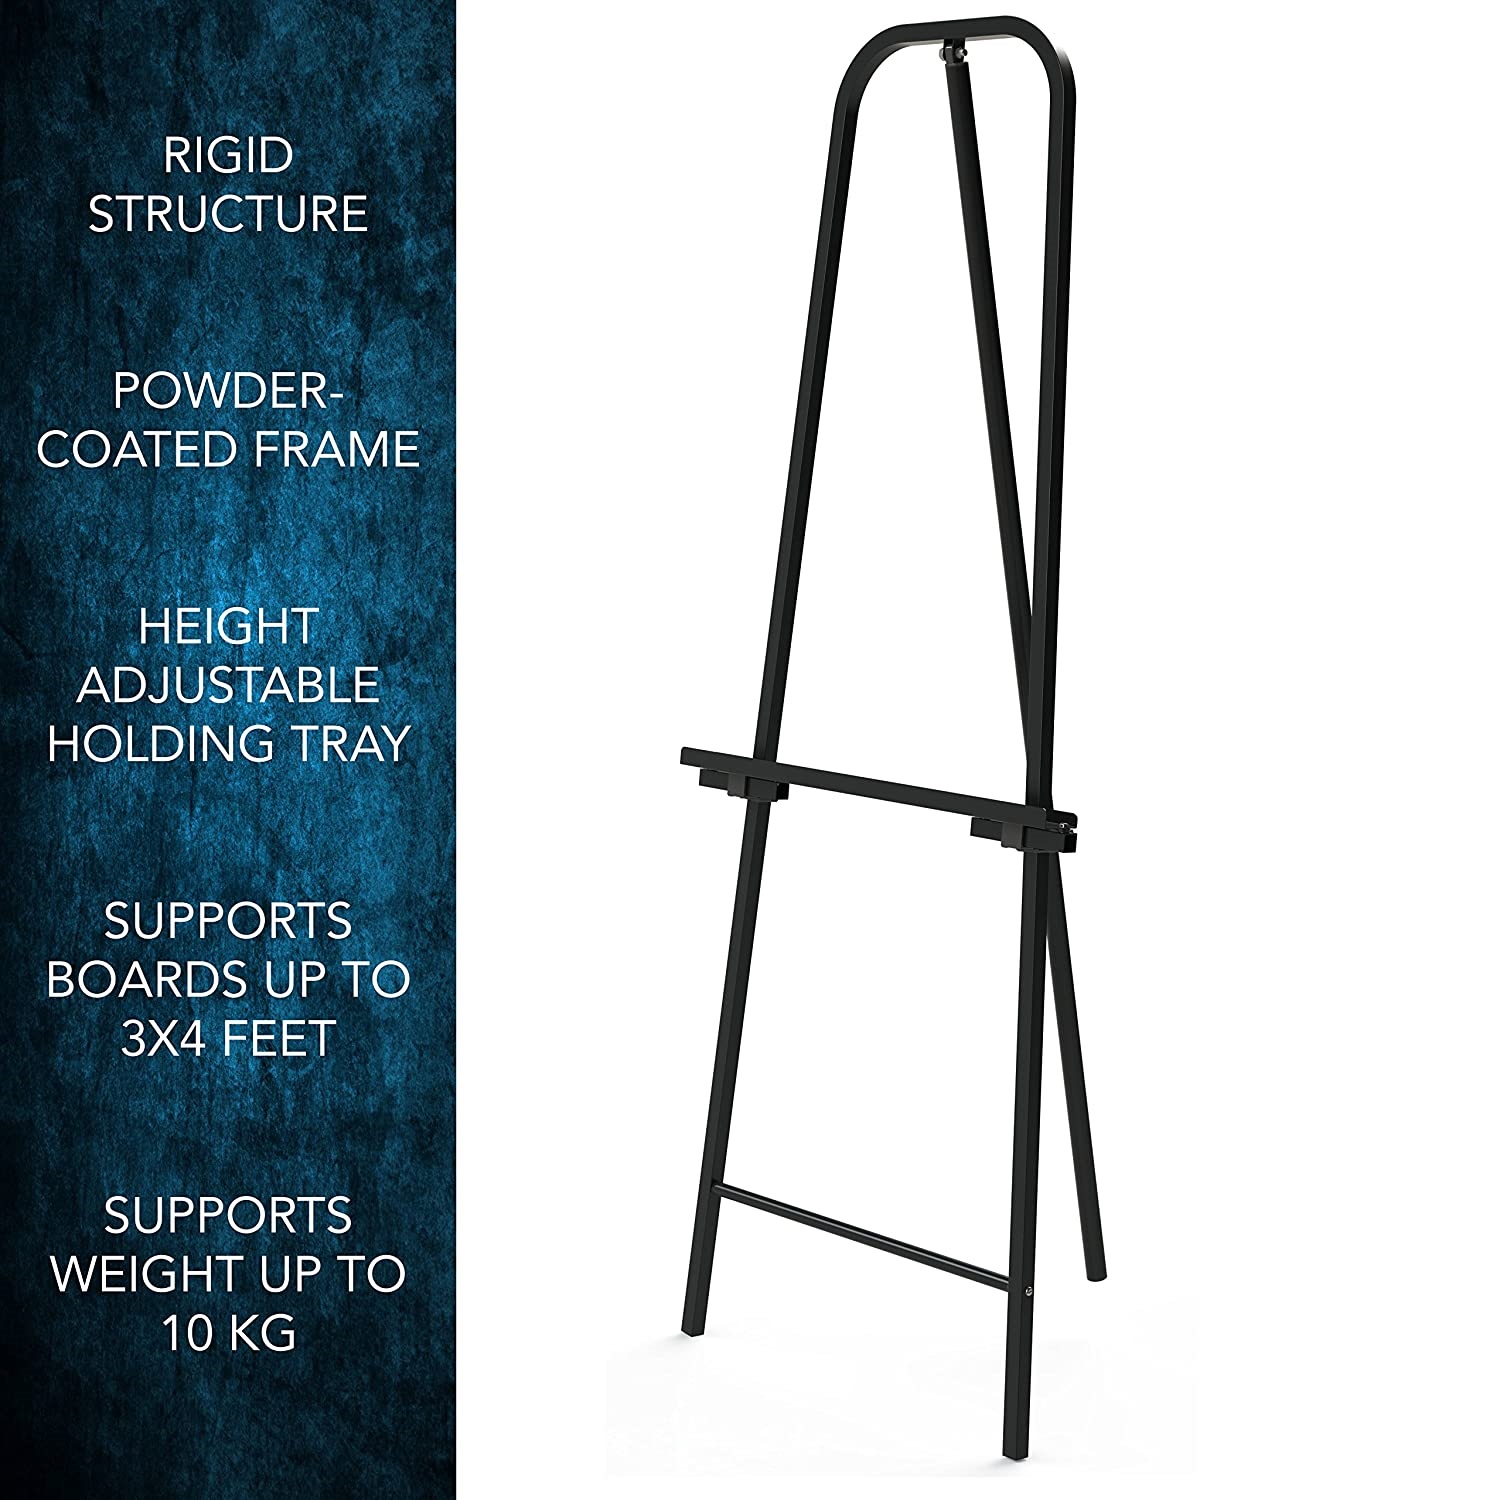 Crown Easel Heavy-Duty Metal Easel Stand for Art, Painting & Display Black (Pack of 1)